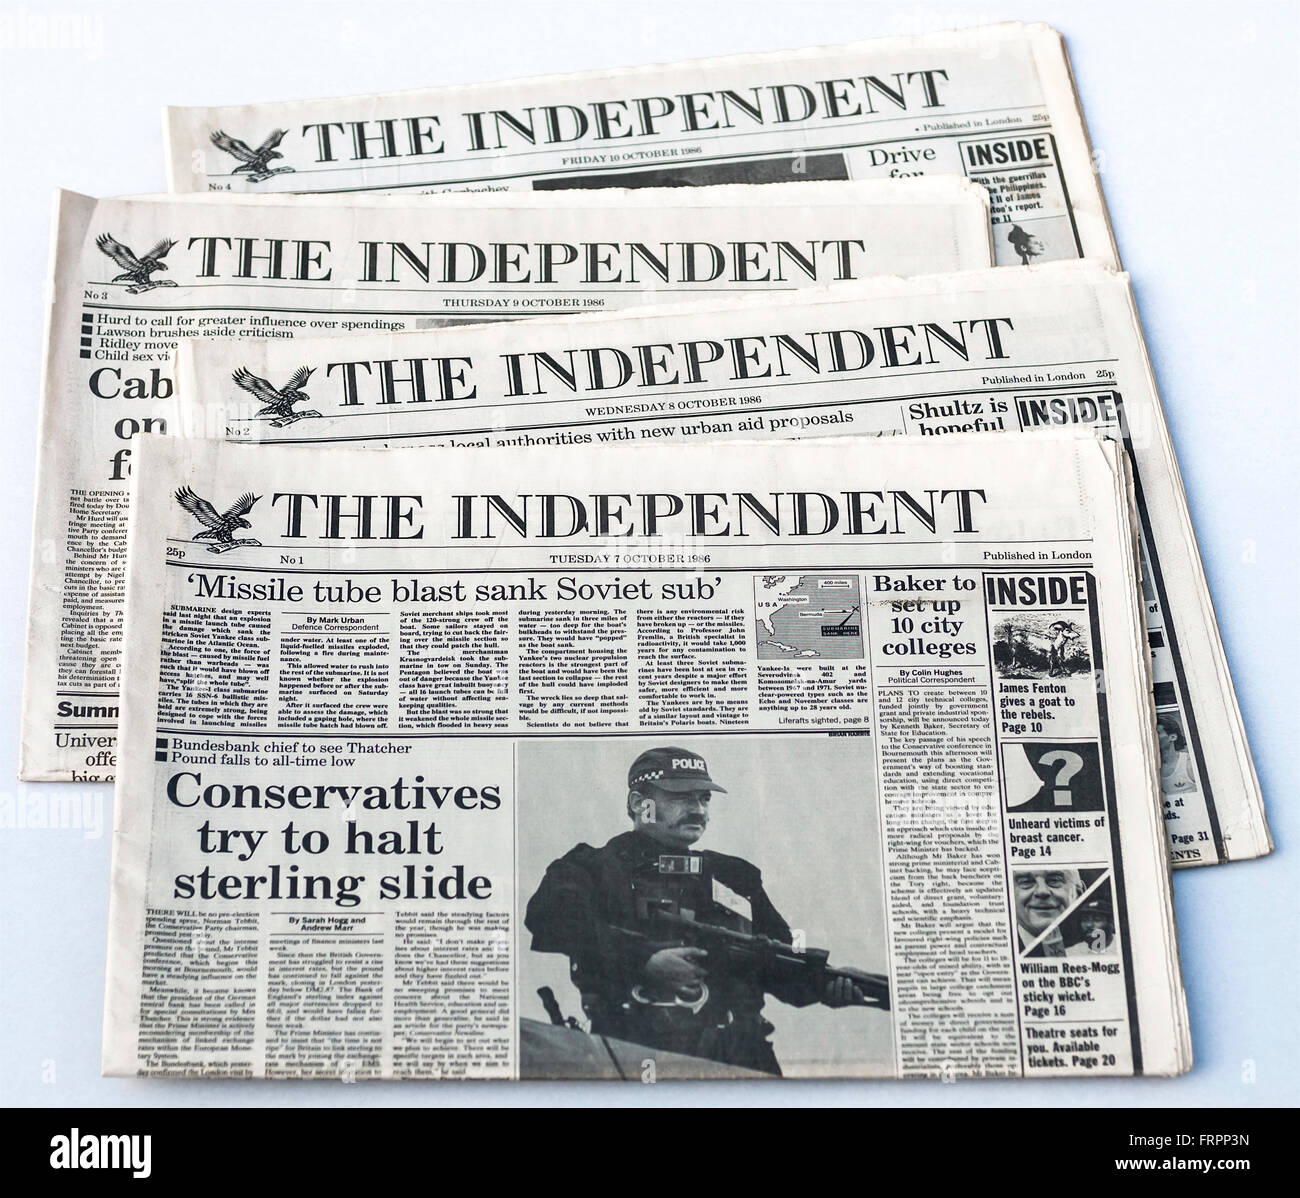 Upper front pages of Issues #1-4 'The Independent' UK national newspaper launched Tuesday 7th October 1986 - 'The Independent' is ceasing in print form on Saturday 26th March 2016 after close to 30 years publication. Credit:  Ed Buziak/Alamy Live News Stock Photo